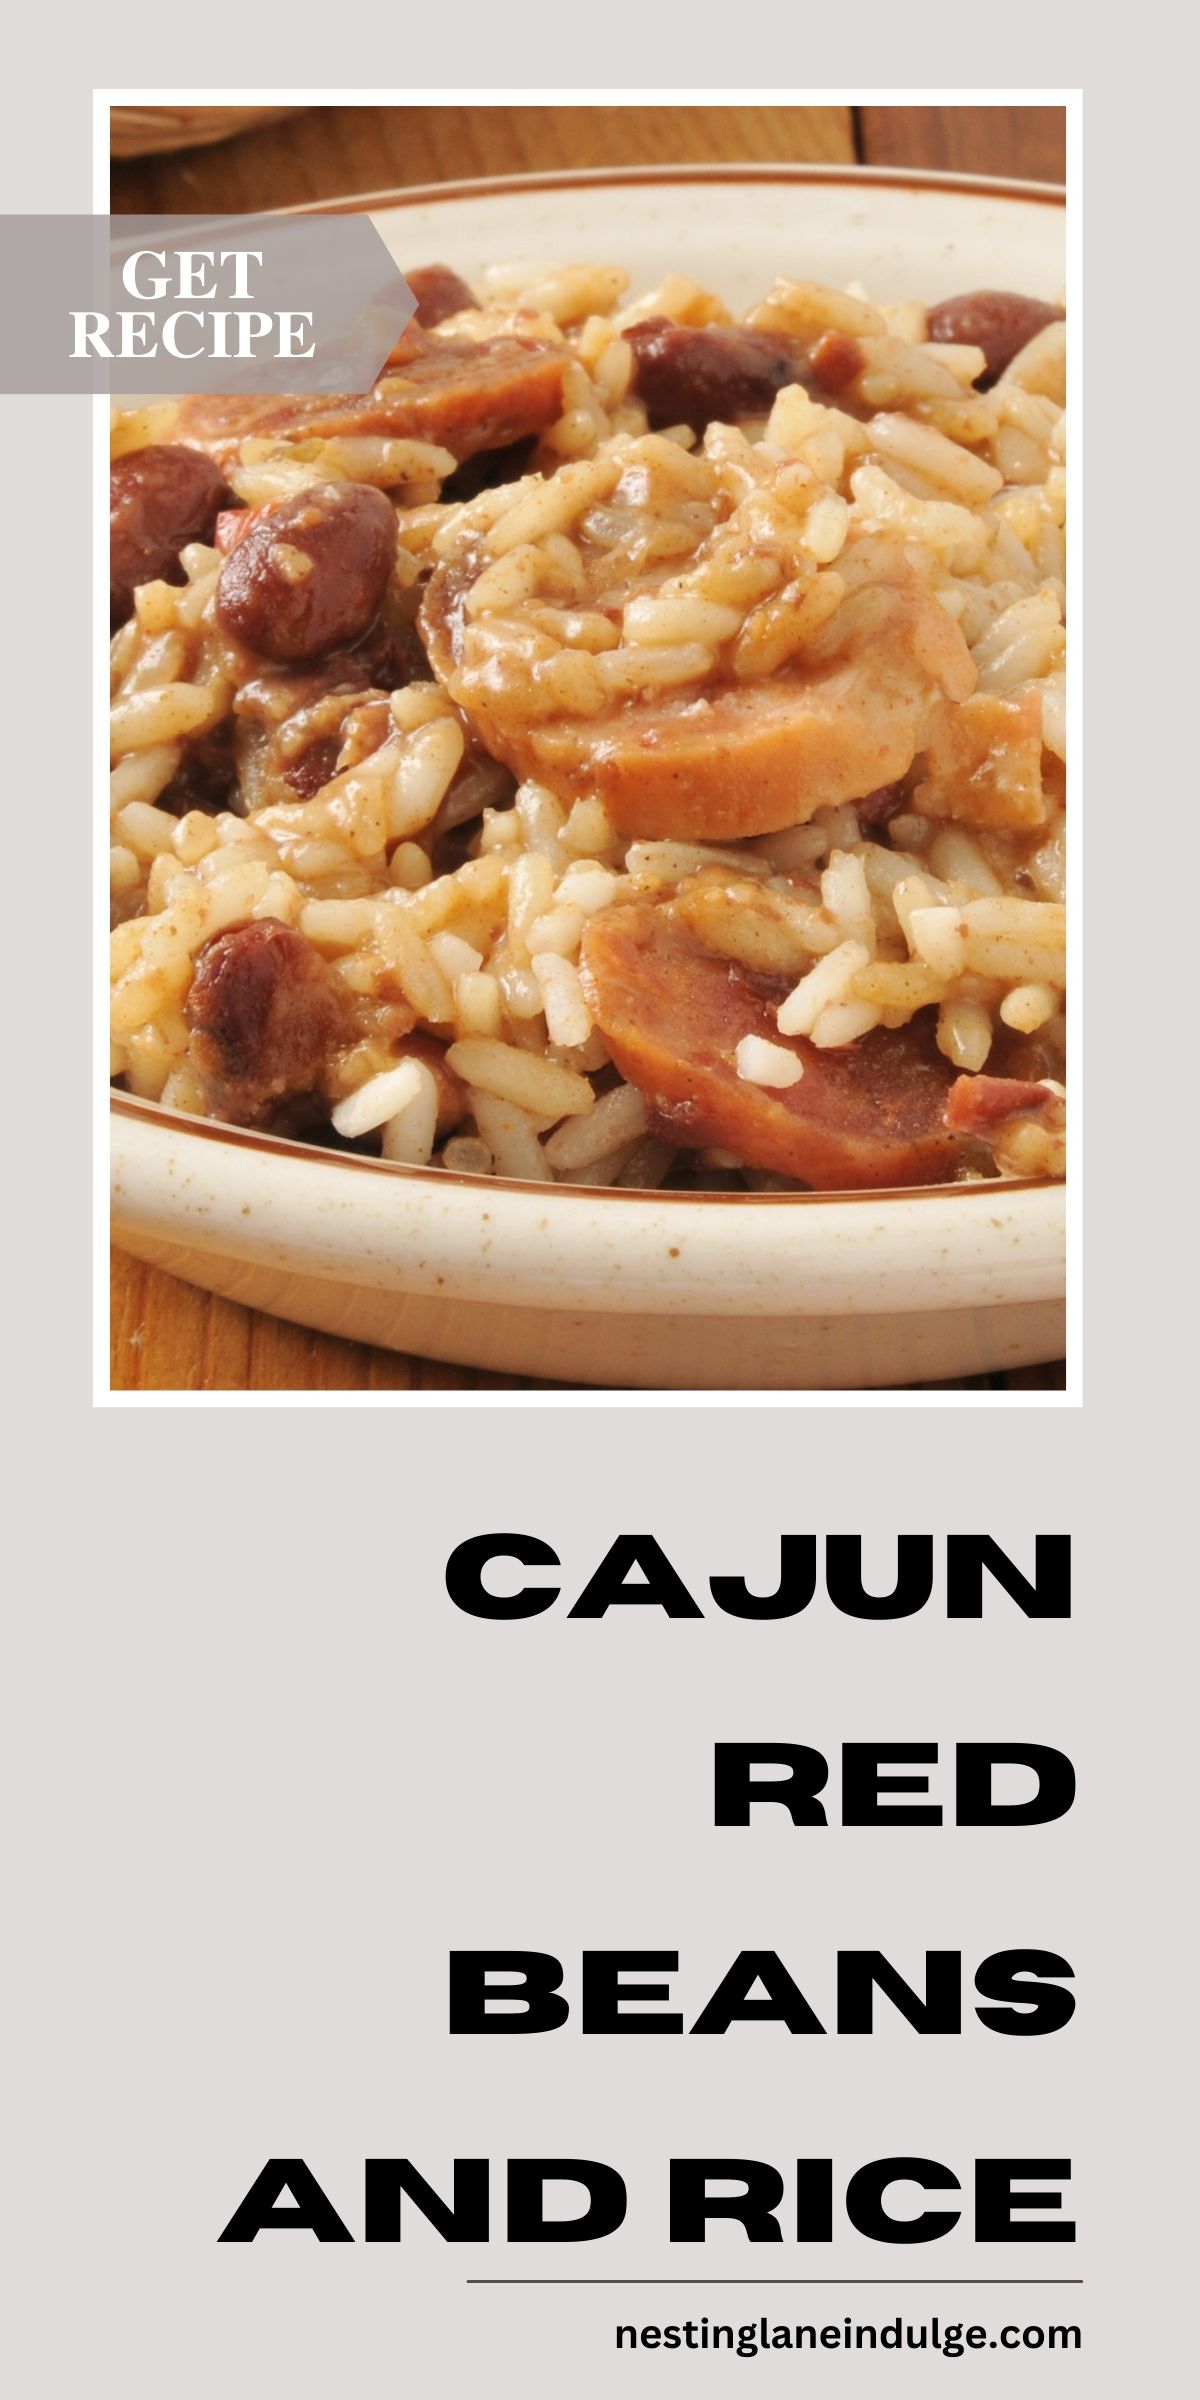 Cajun Red Beans and Rice Graphic.